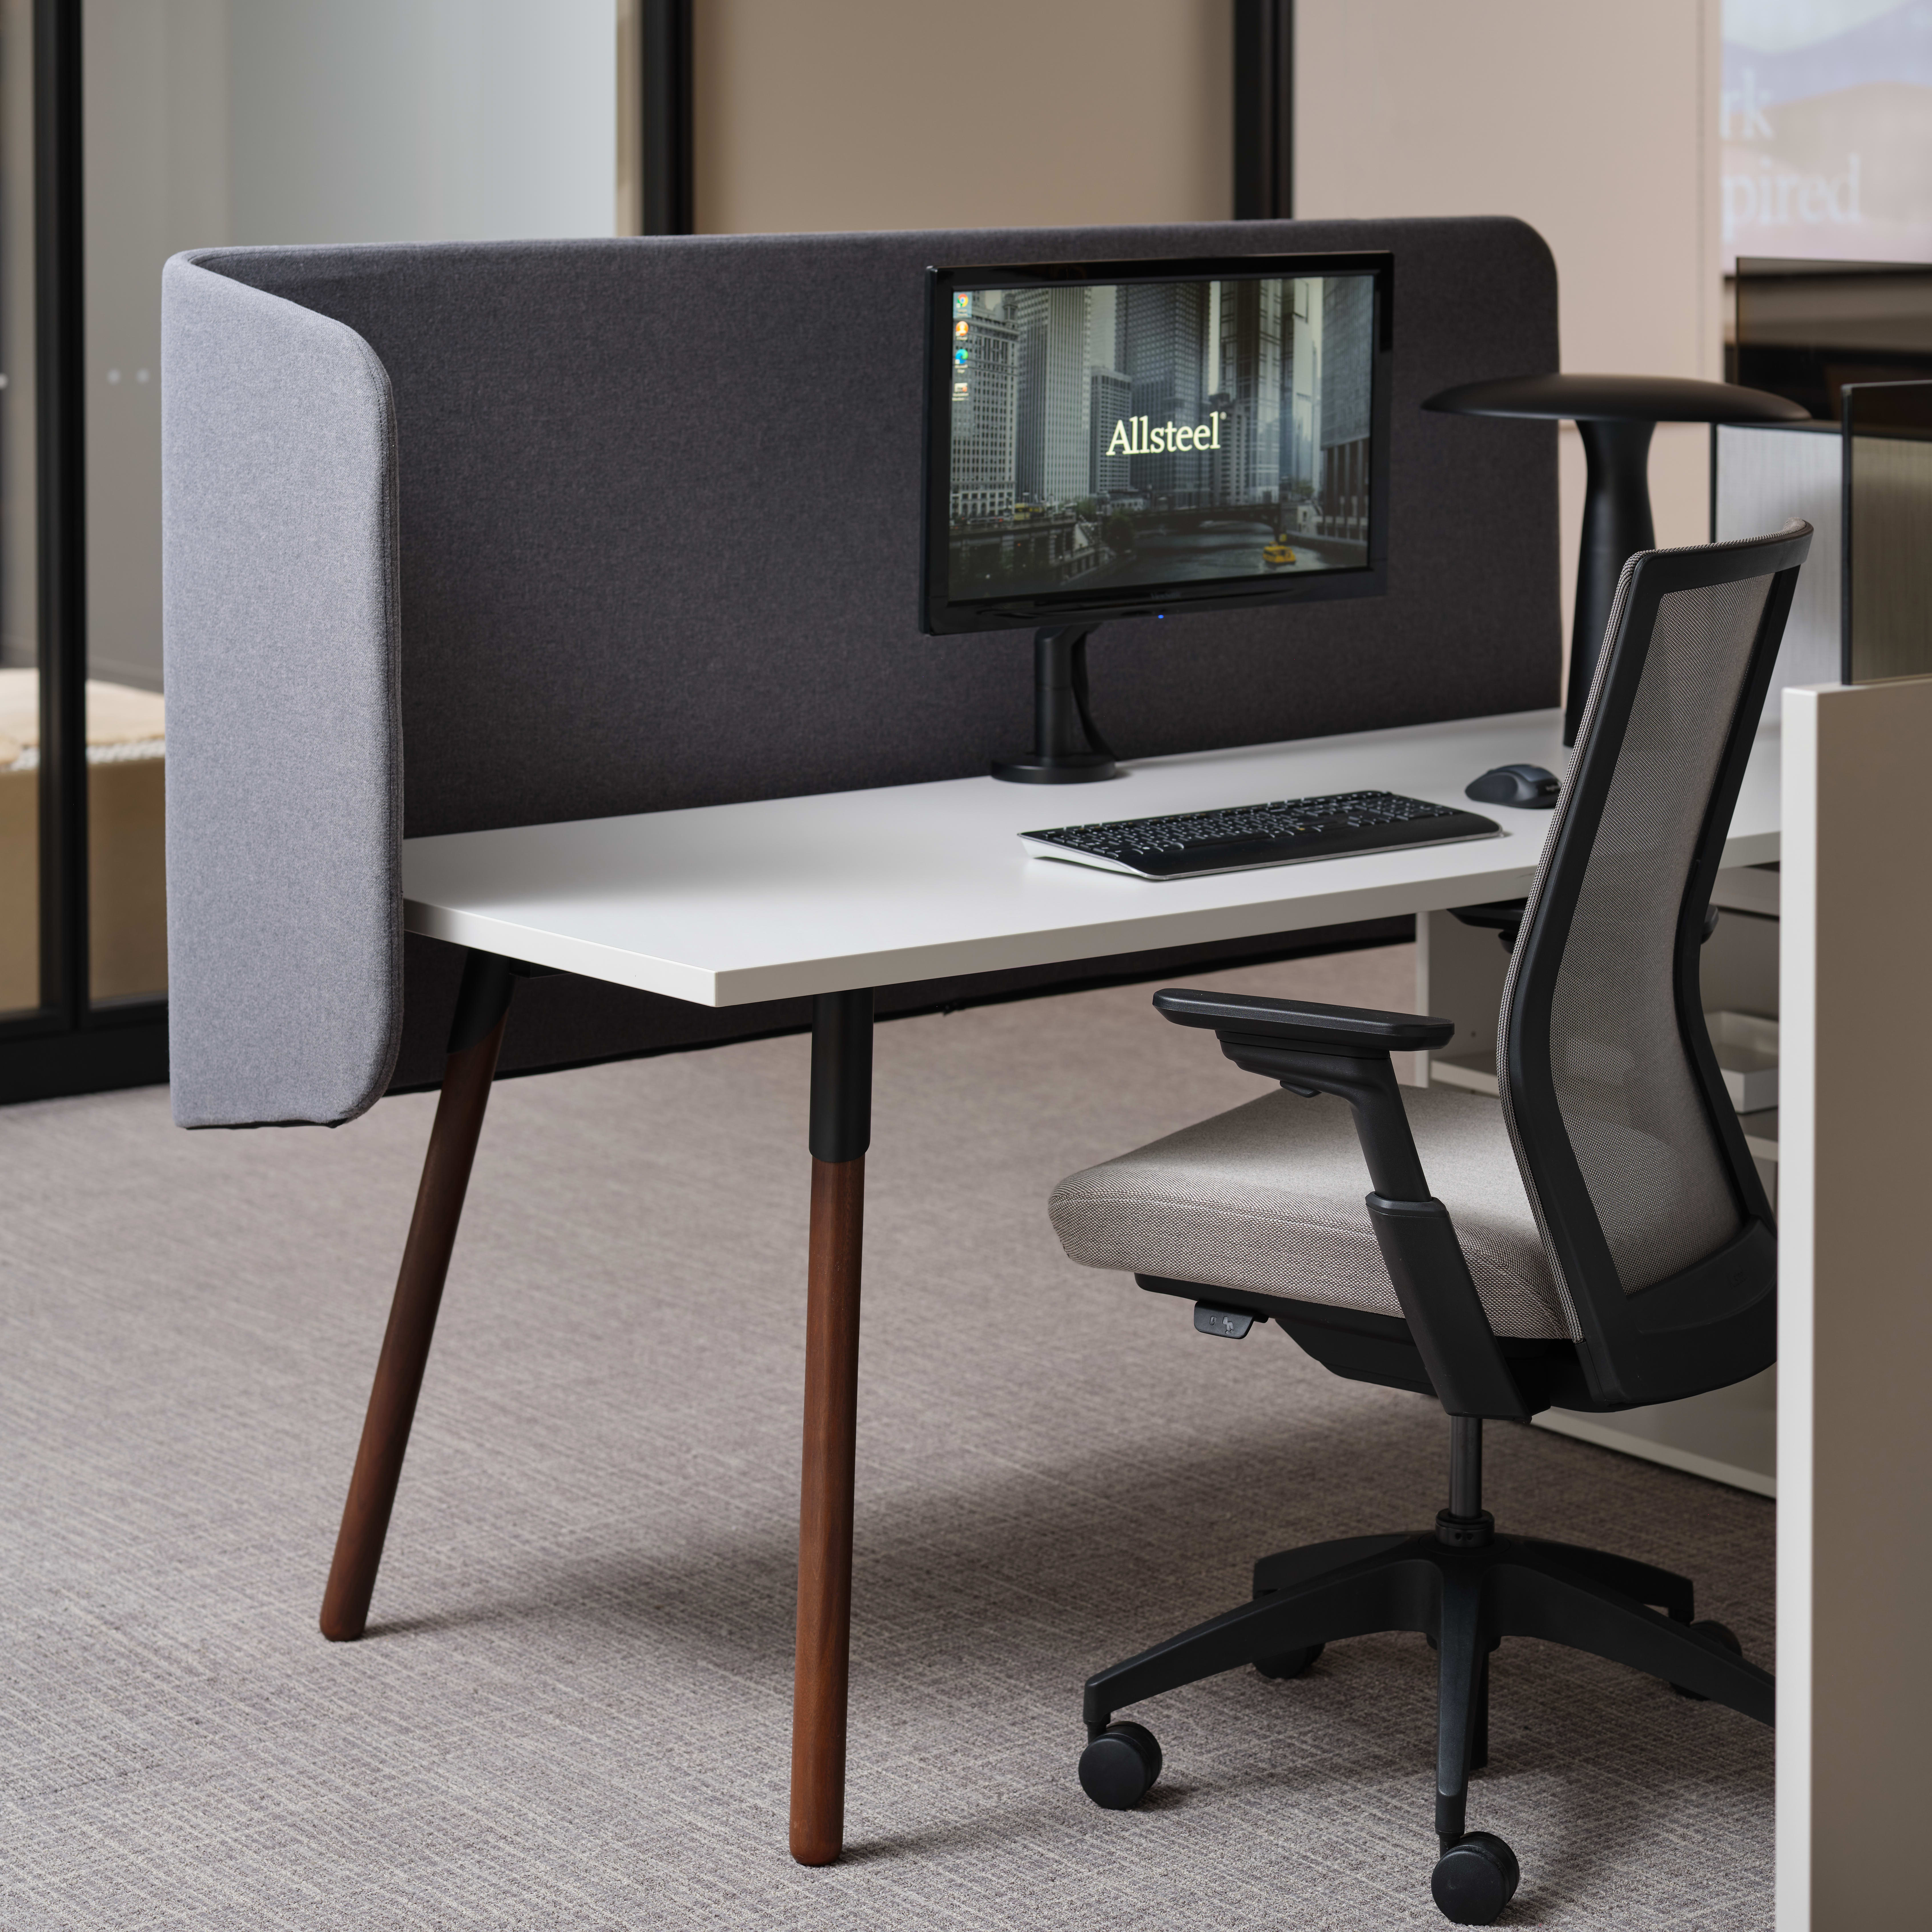 Workstation with privacy screen and task chair